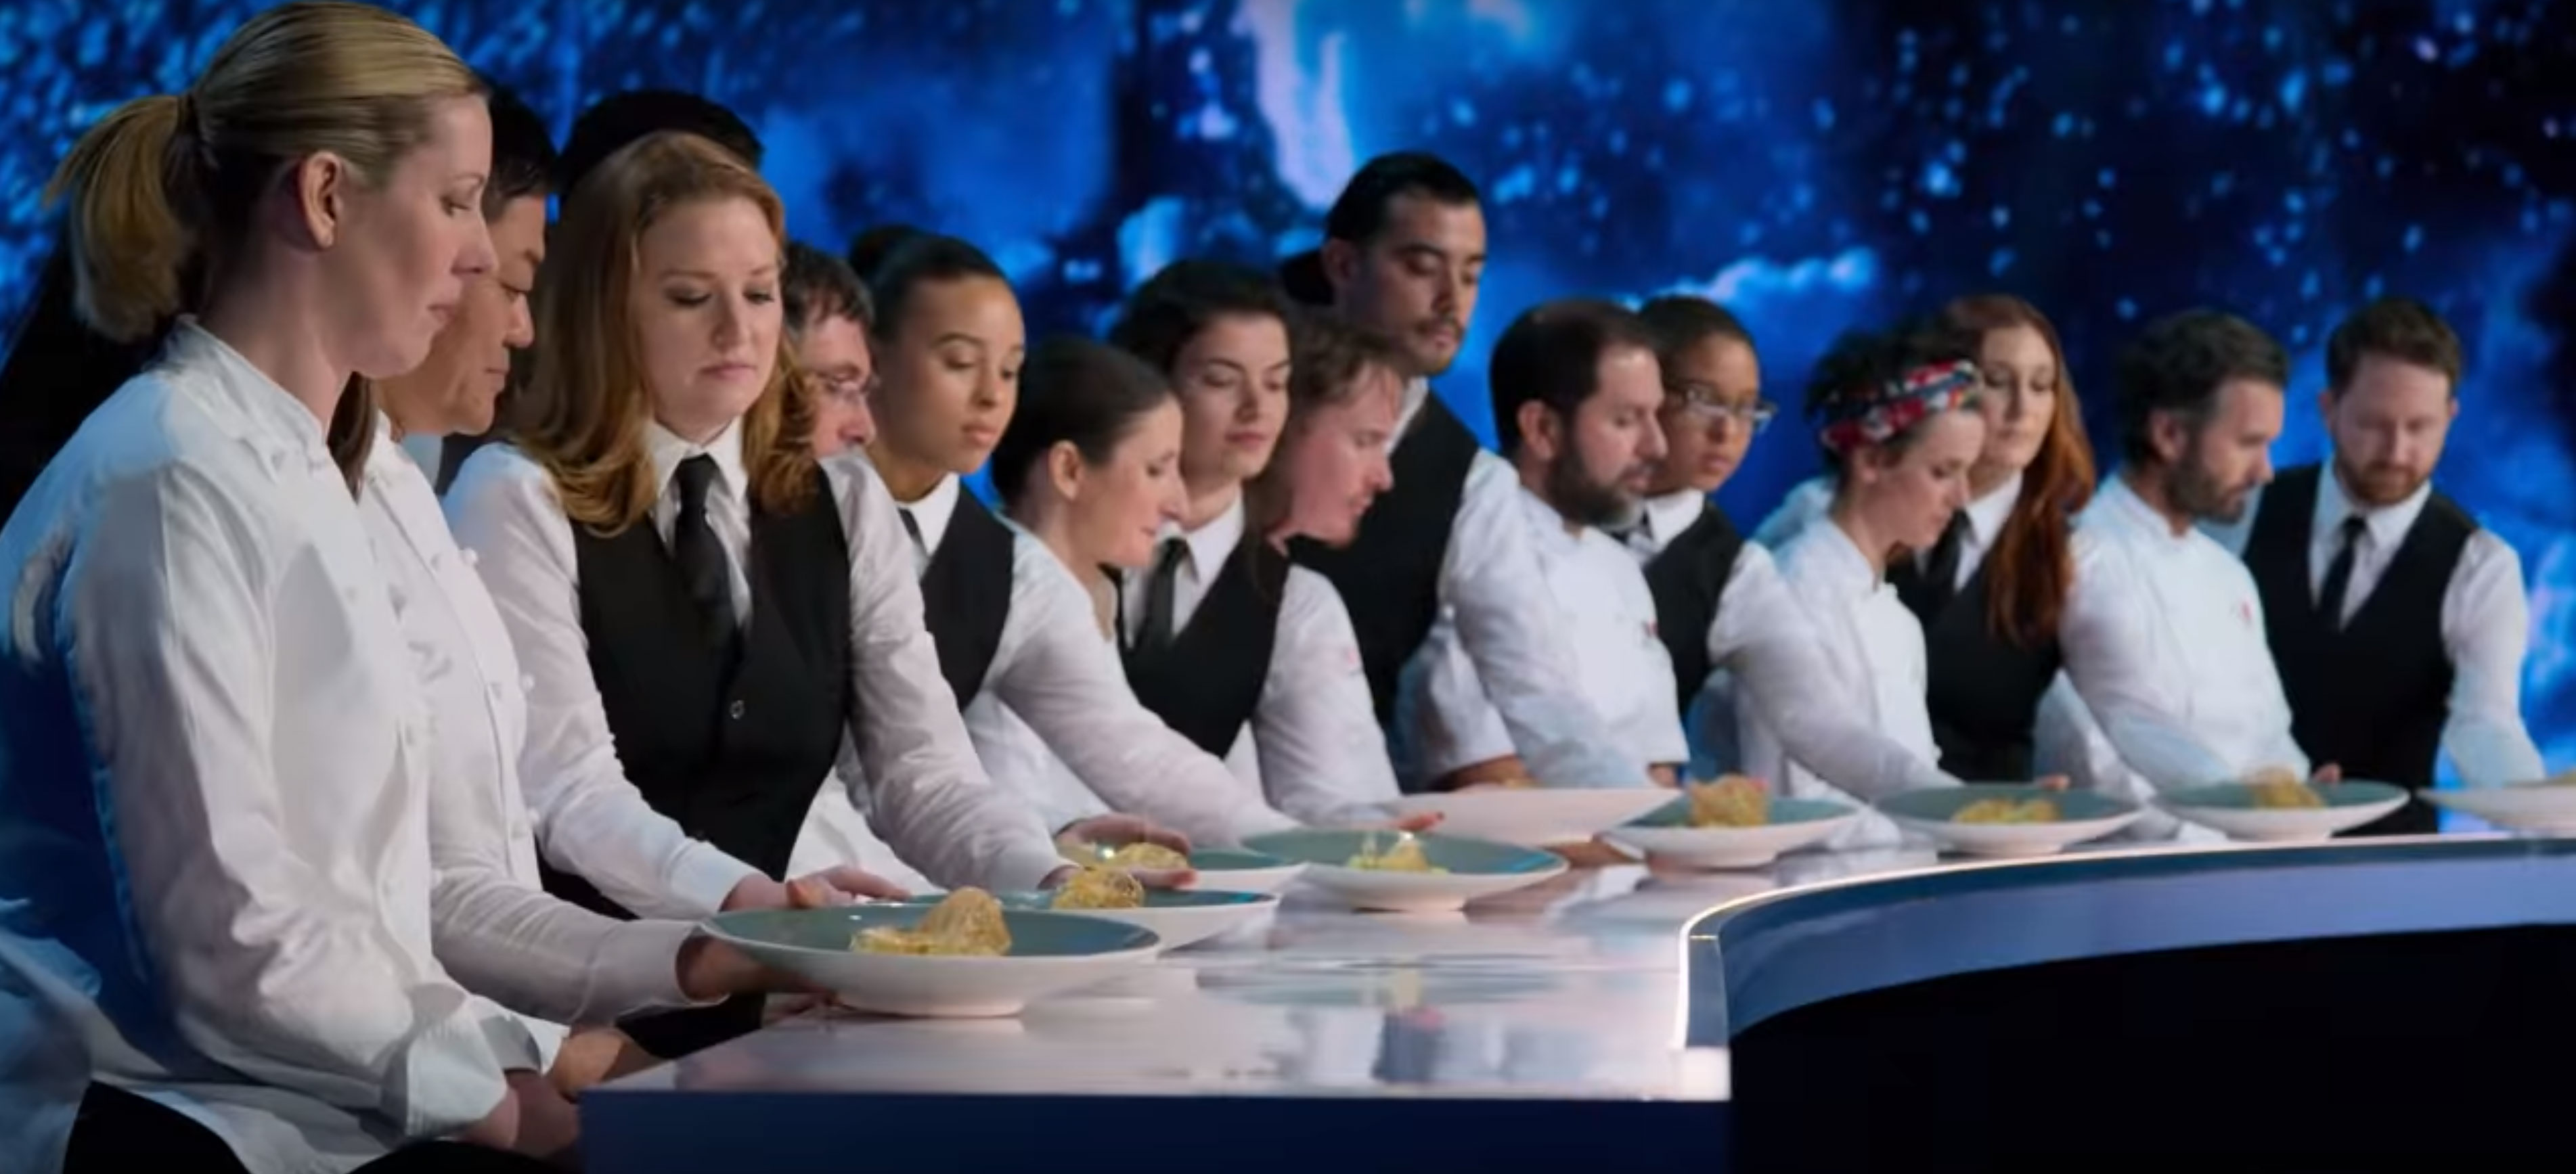 The Final Table: Where Are the Chefs Now?